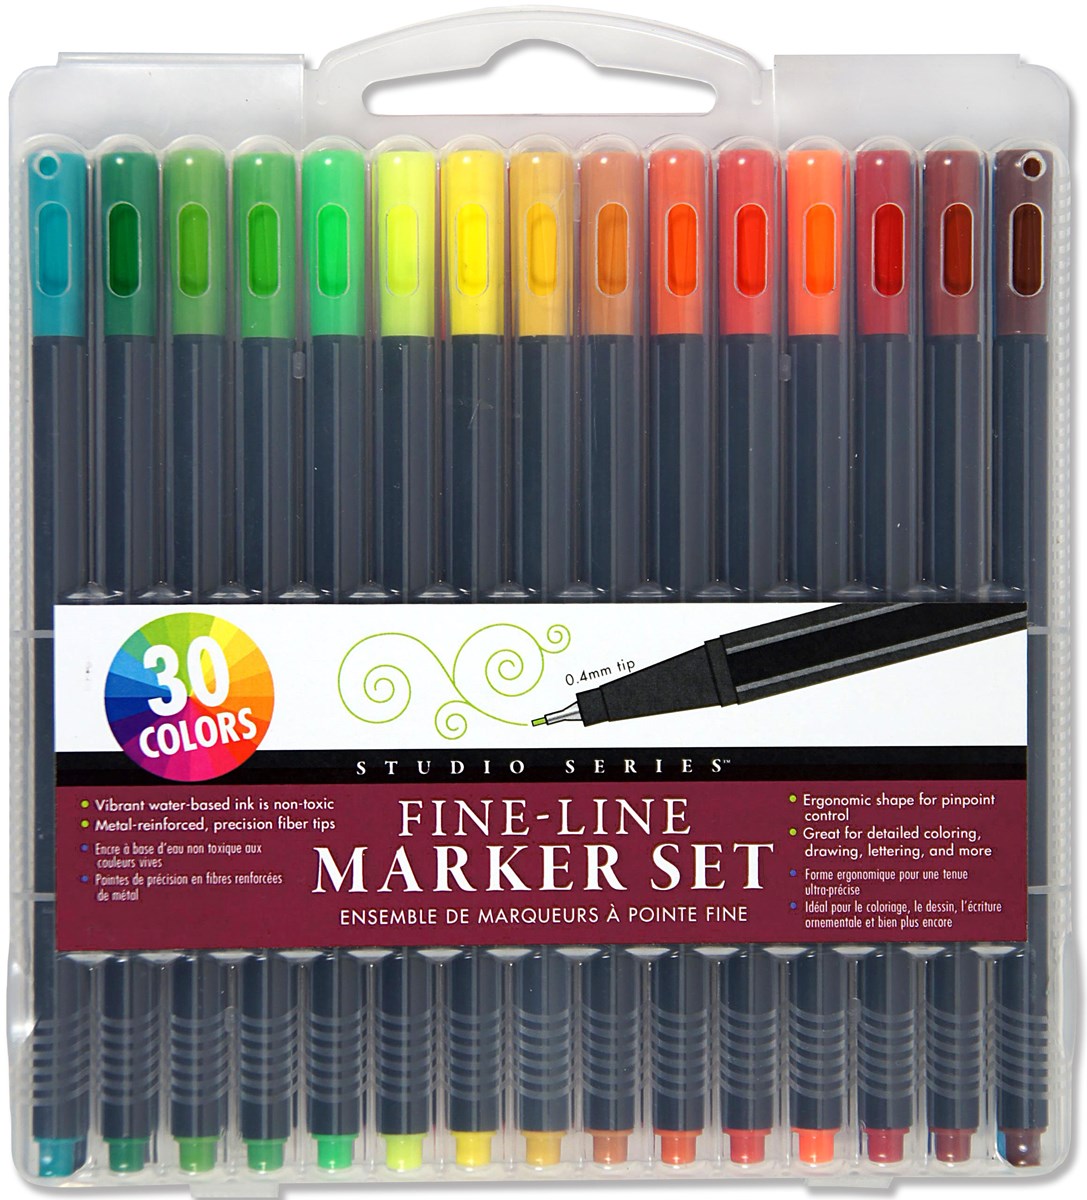 3D Glossy Jelly Pen - 12 Colors Candy Color Gel Ink Pen, Art Supplies  Markers